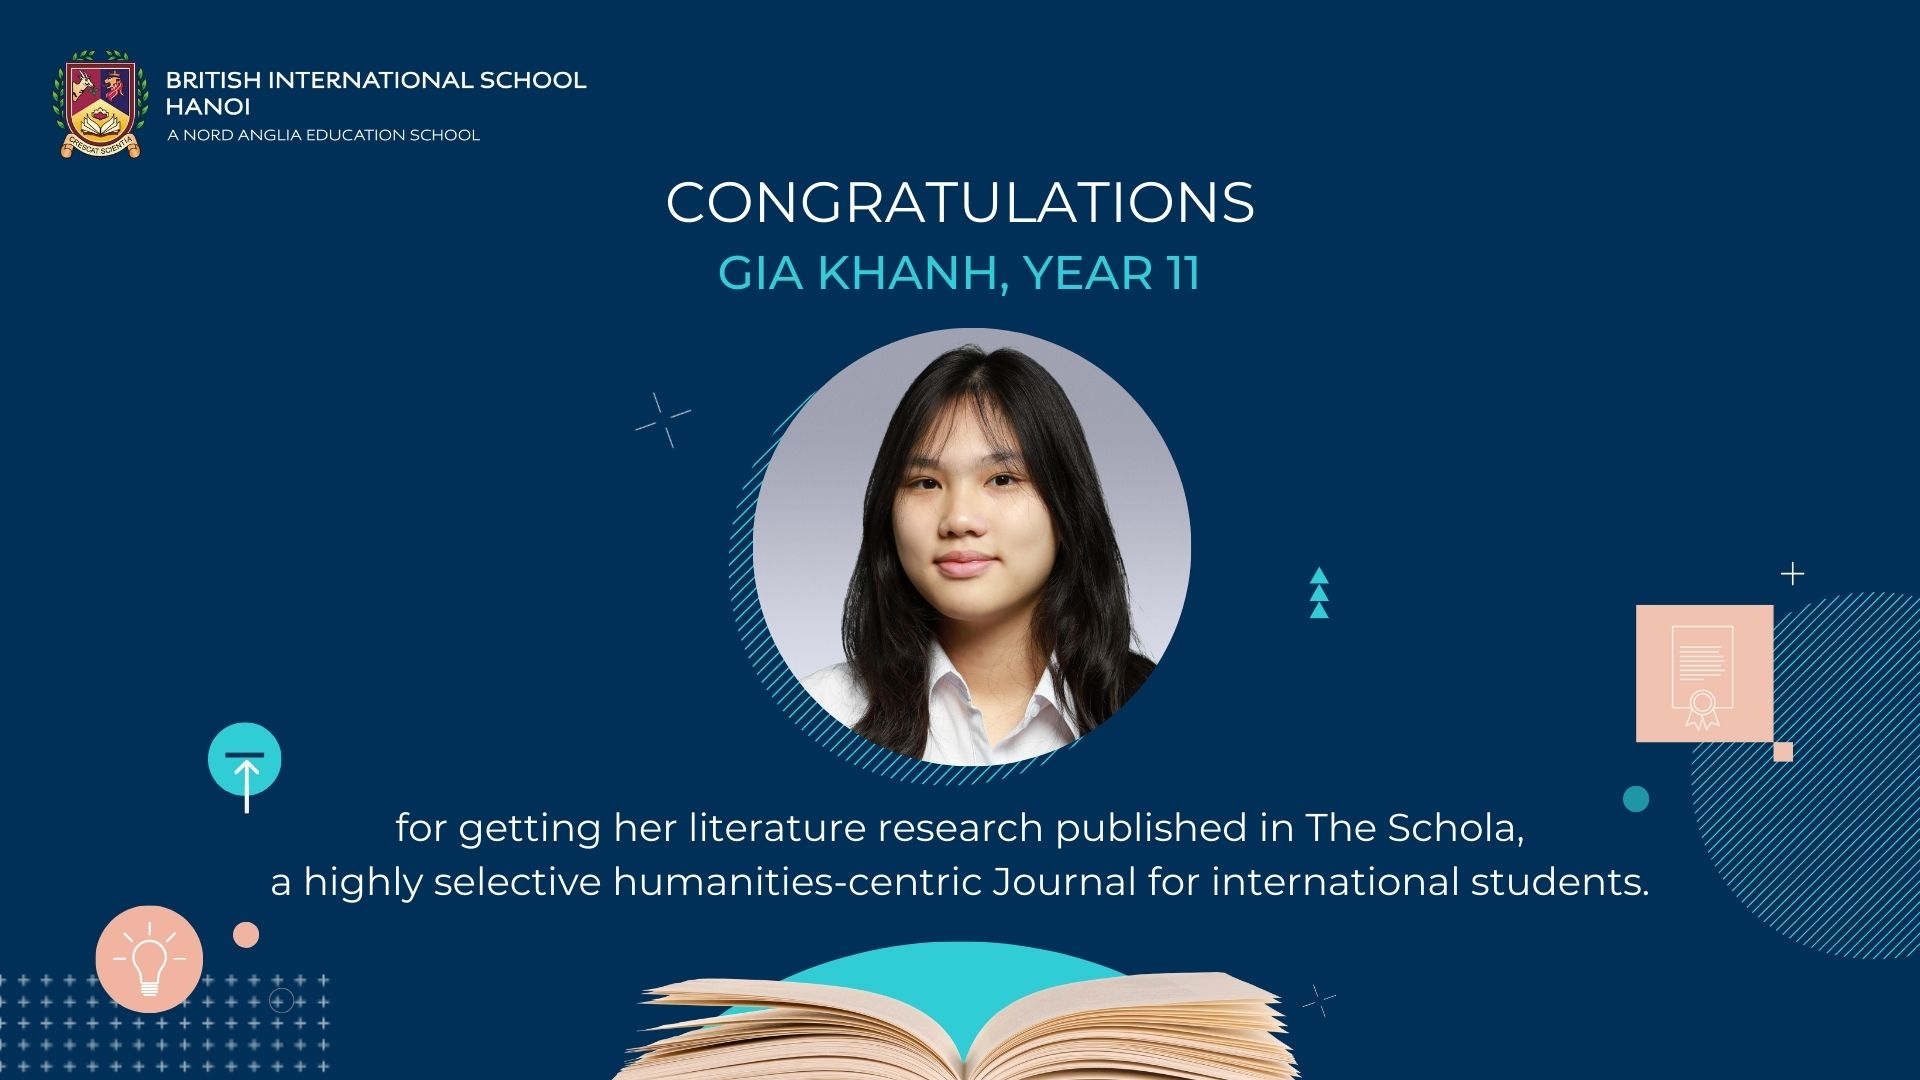 Gia Khanh literary research published in the schola